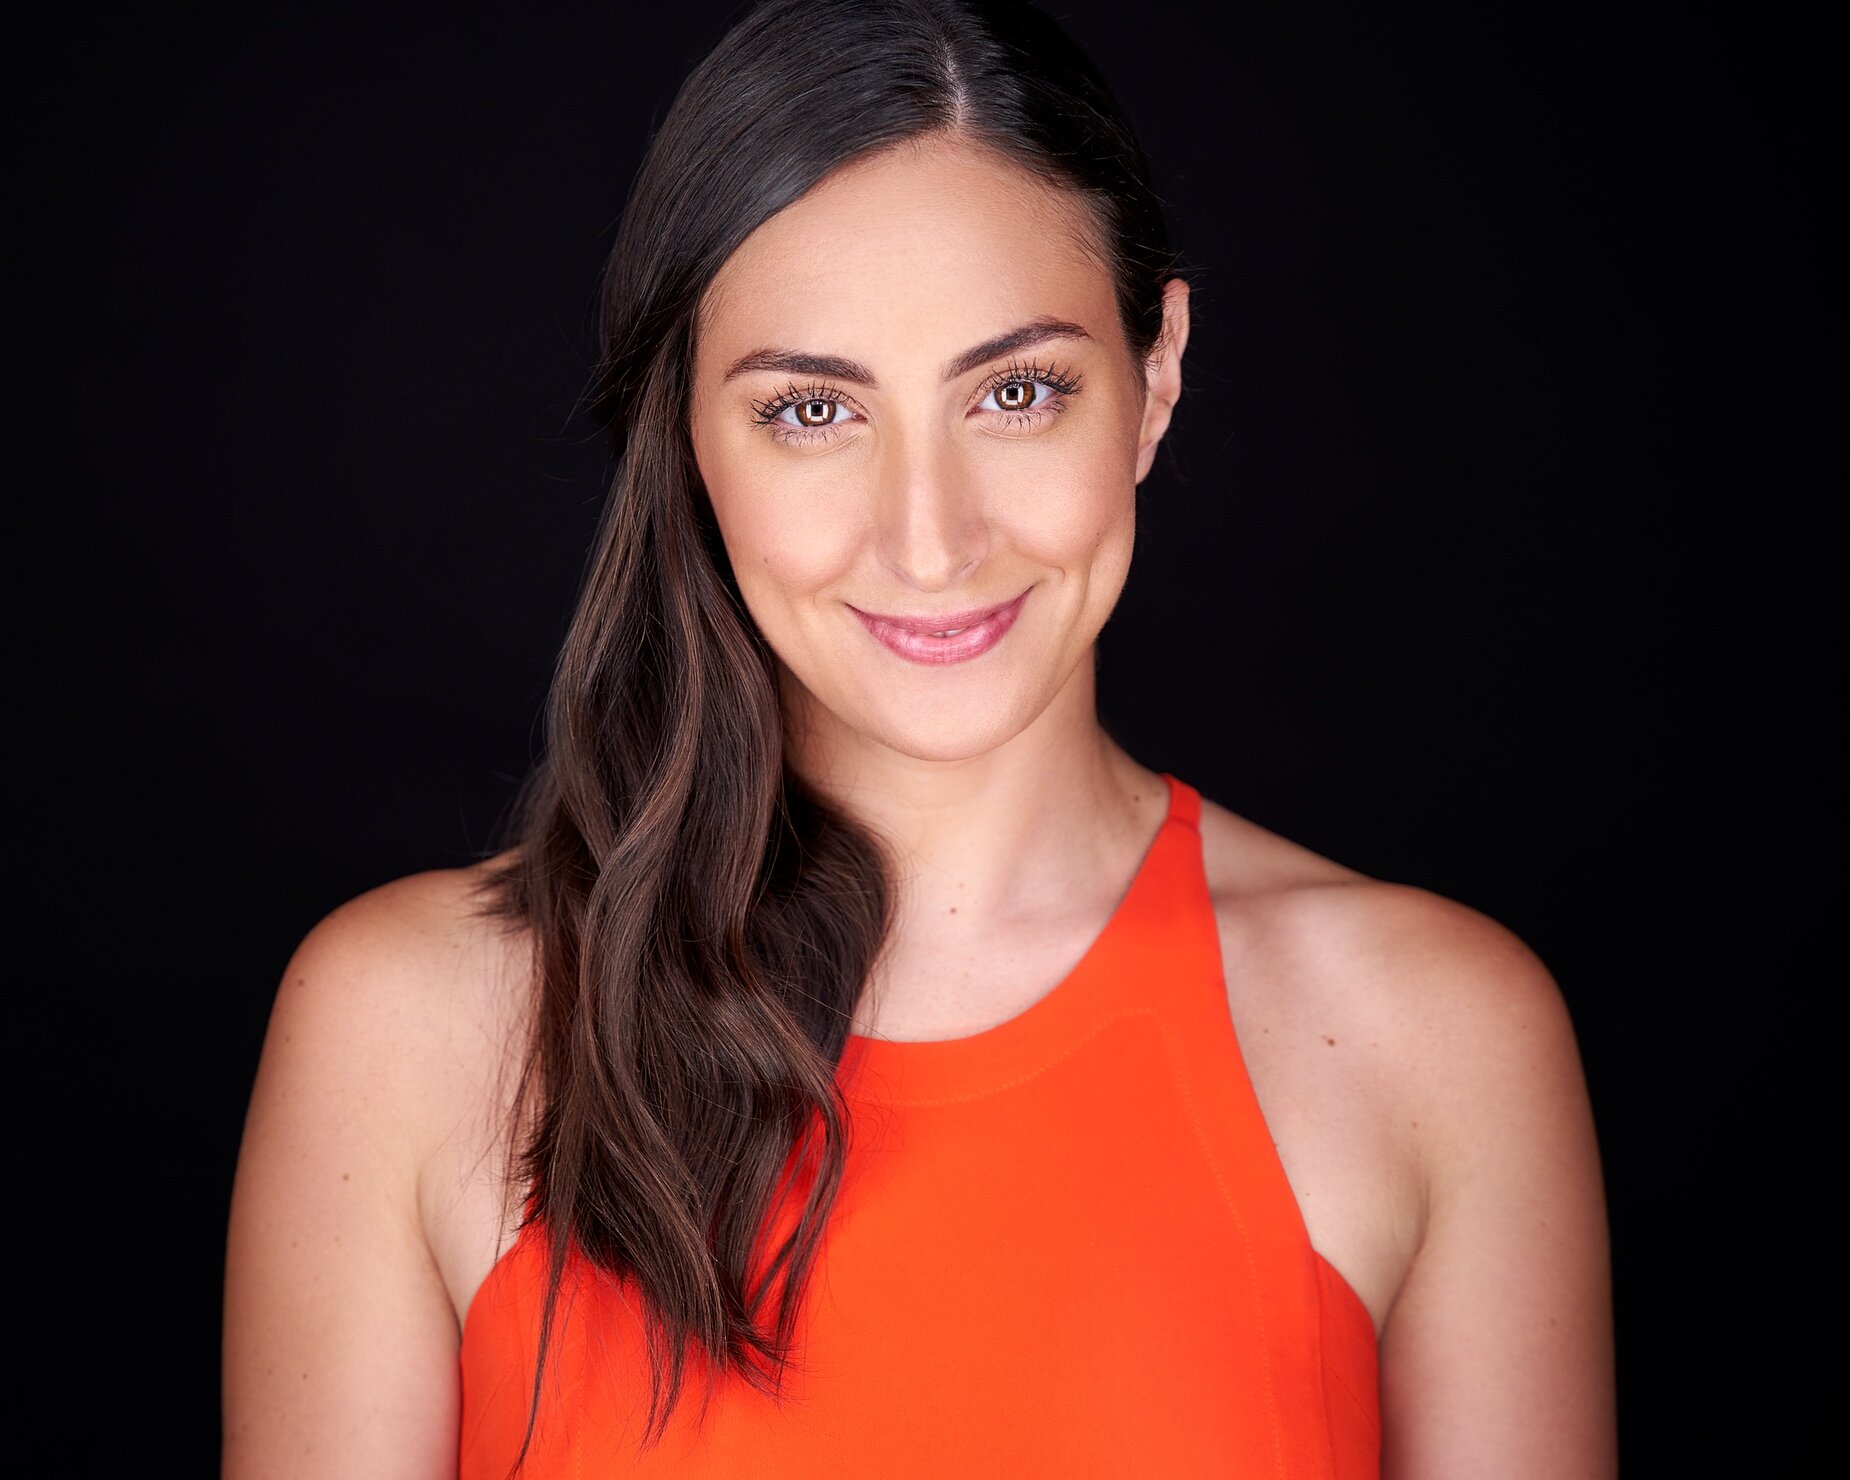 20190708_ForestHillRealEstate_Headshots0134_Social.png